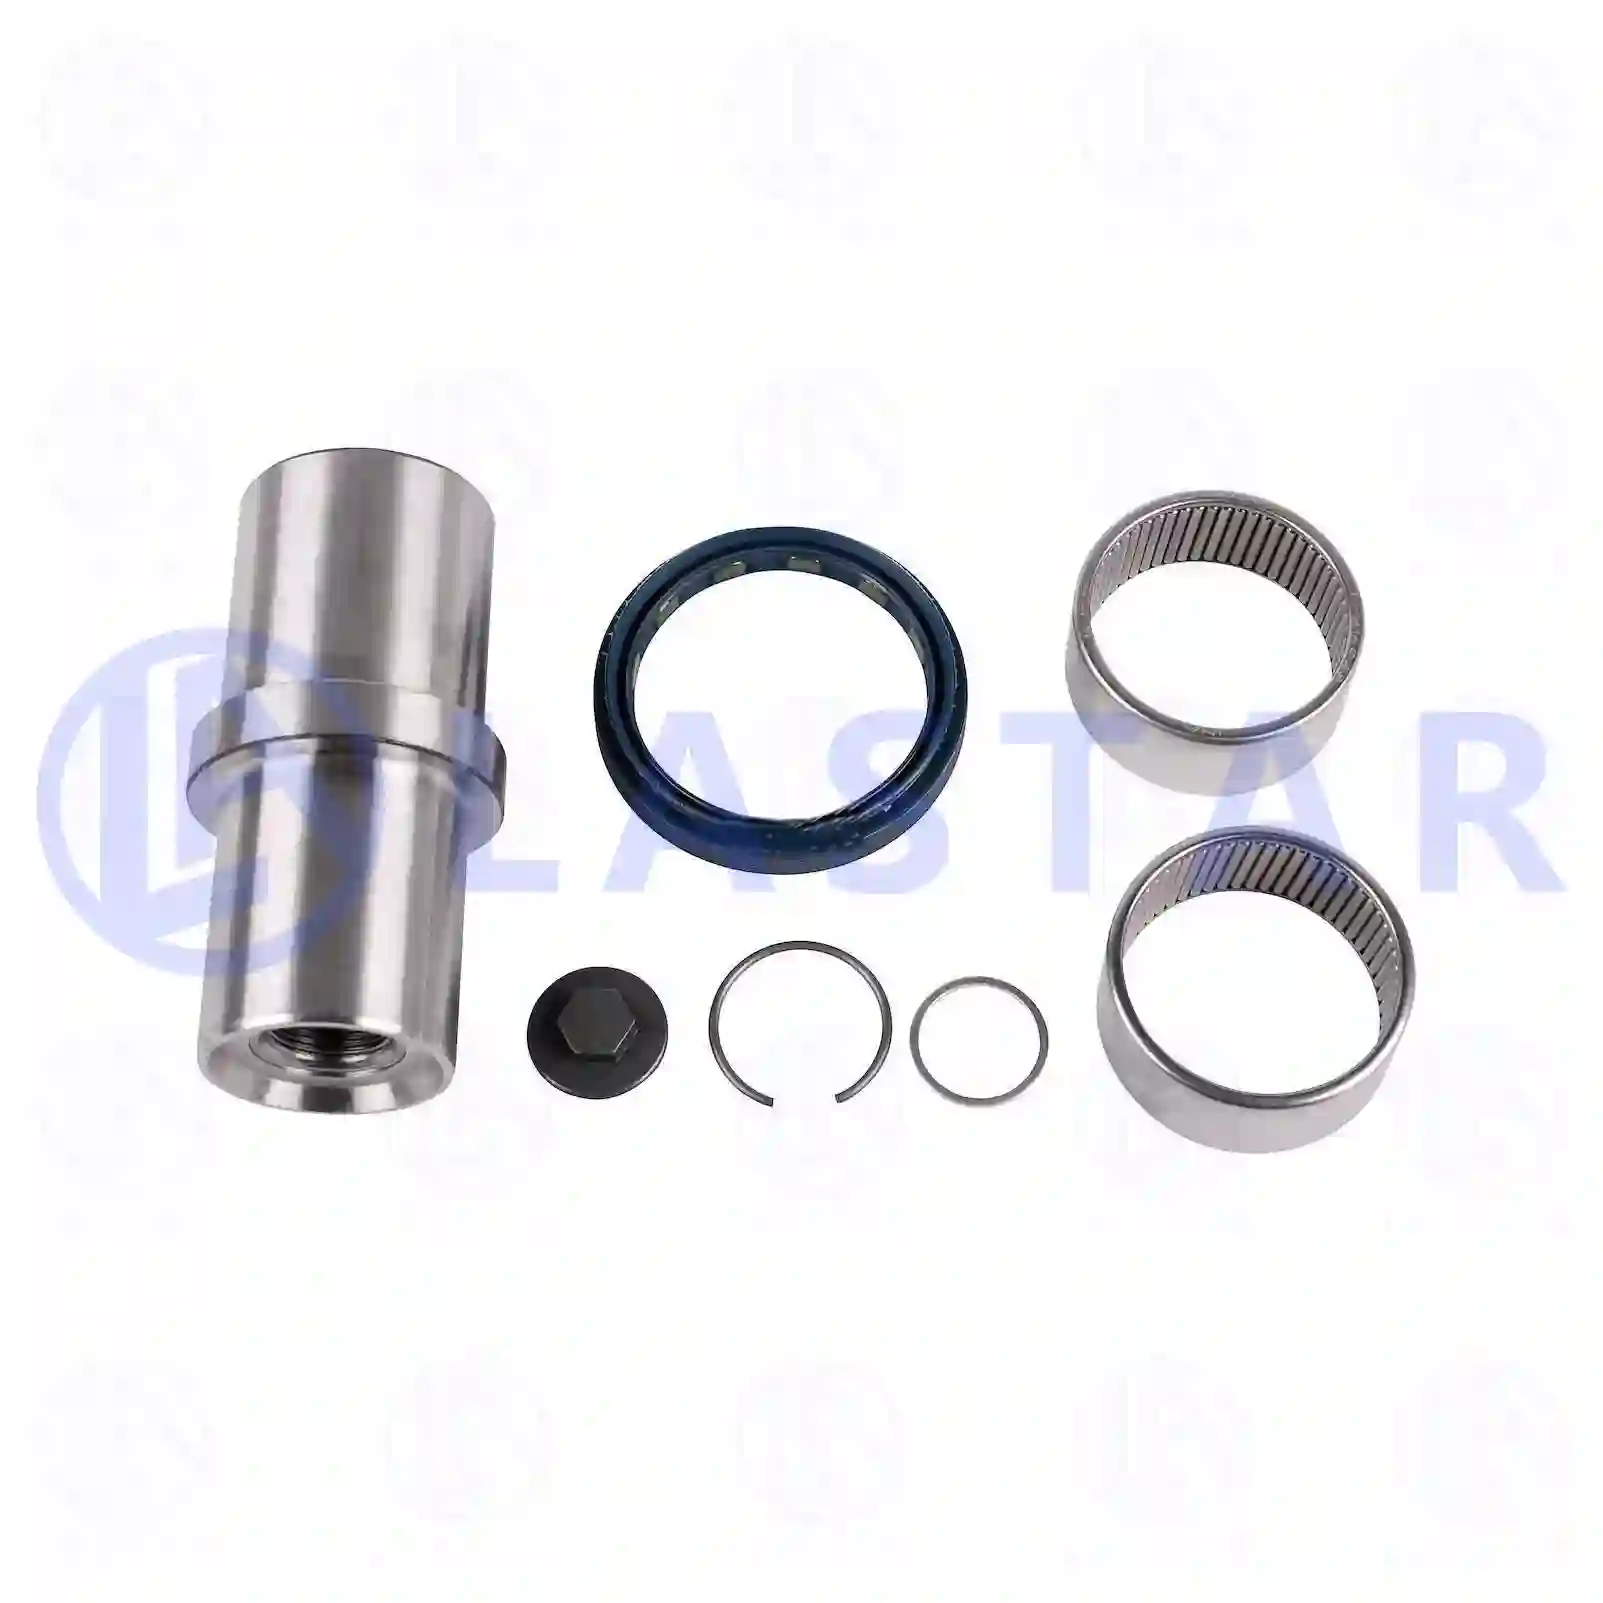 King pin kit, 77730661, 0003301319, 6253300619, 6253320406S, , ||  77730661 Lastar Spare Part | Truck Spare Parts, Auotomotive Spare Parts King pin kit, 77730661, 0003301319, 6253300619, 6253320406S, , ||  77730661 Lastar Spare Part | Truck Spare Parts, Auotomotive Spare Parts